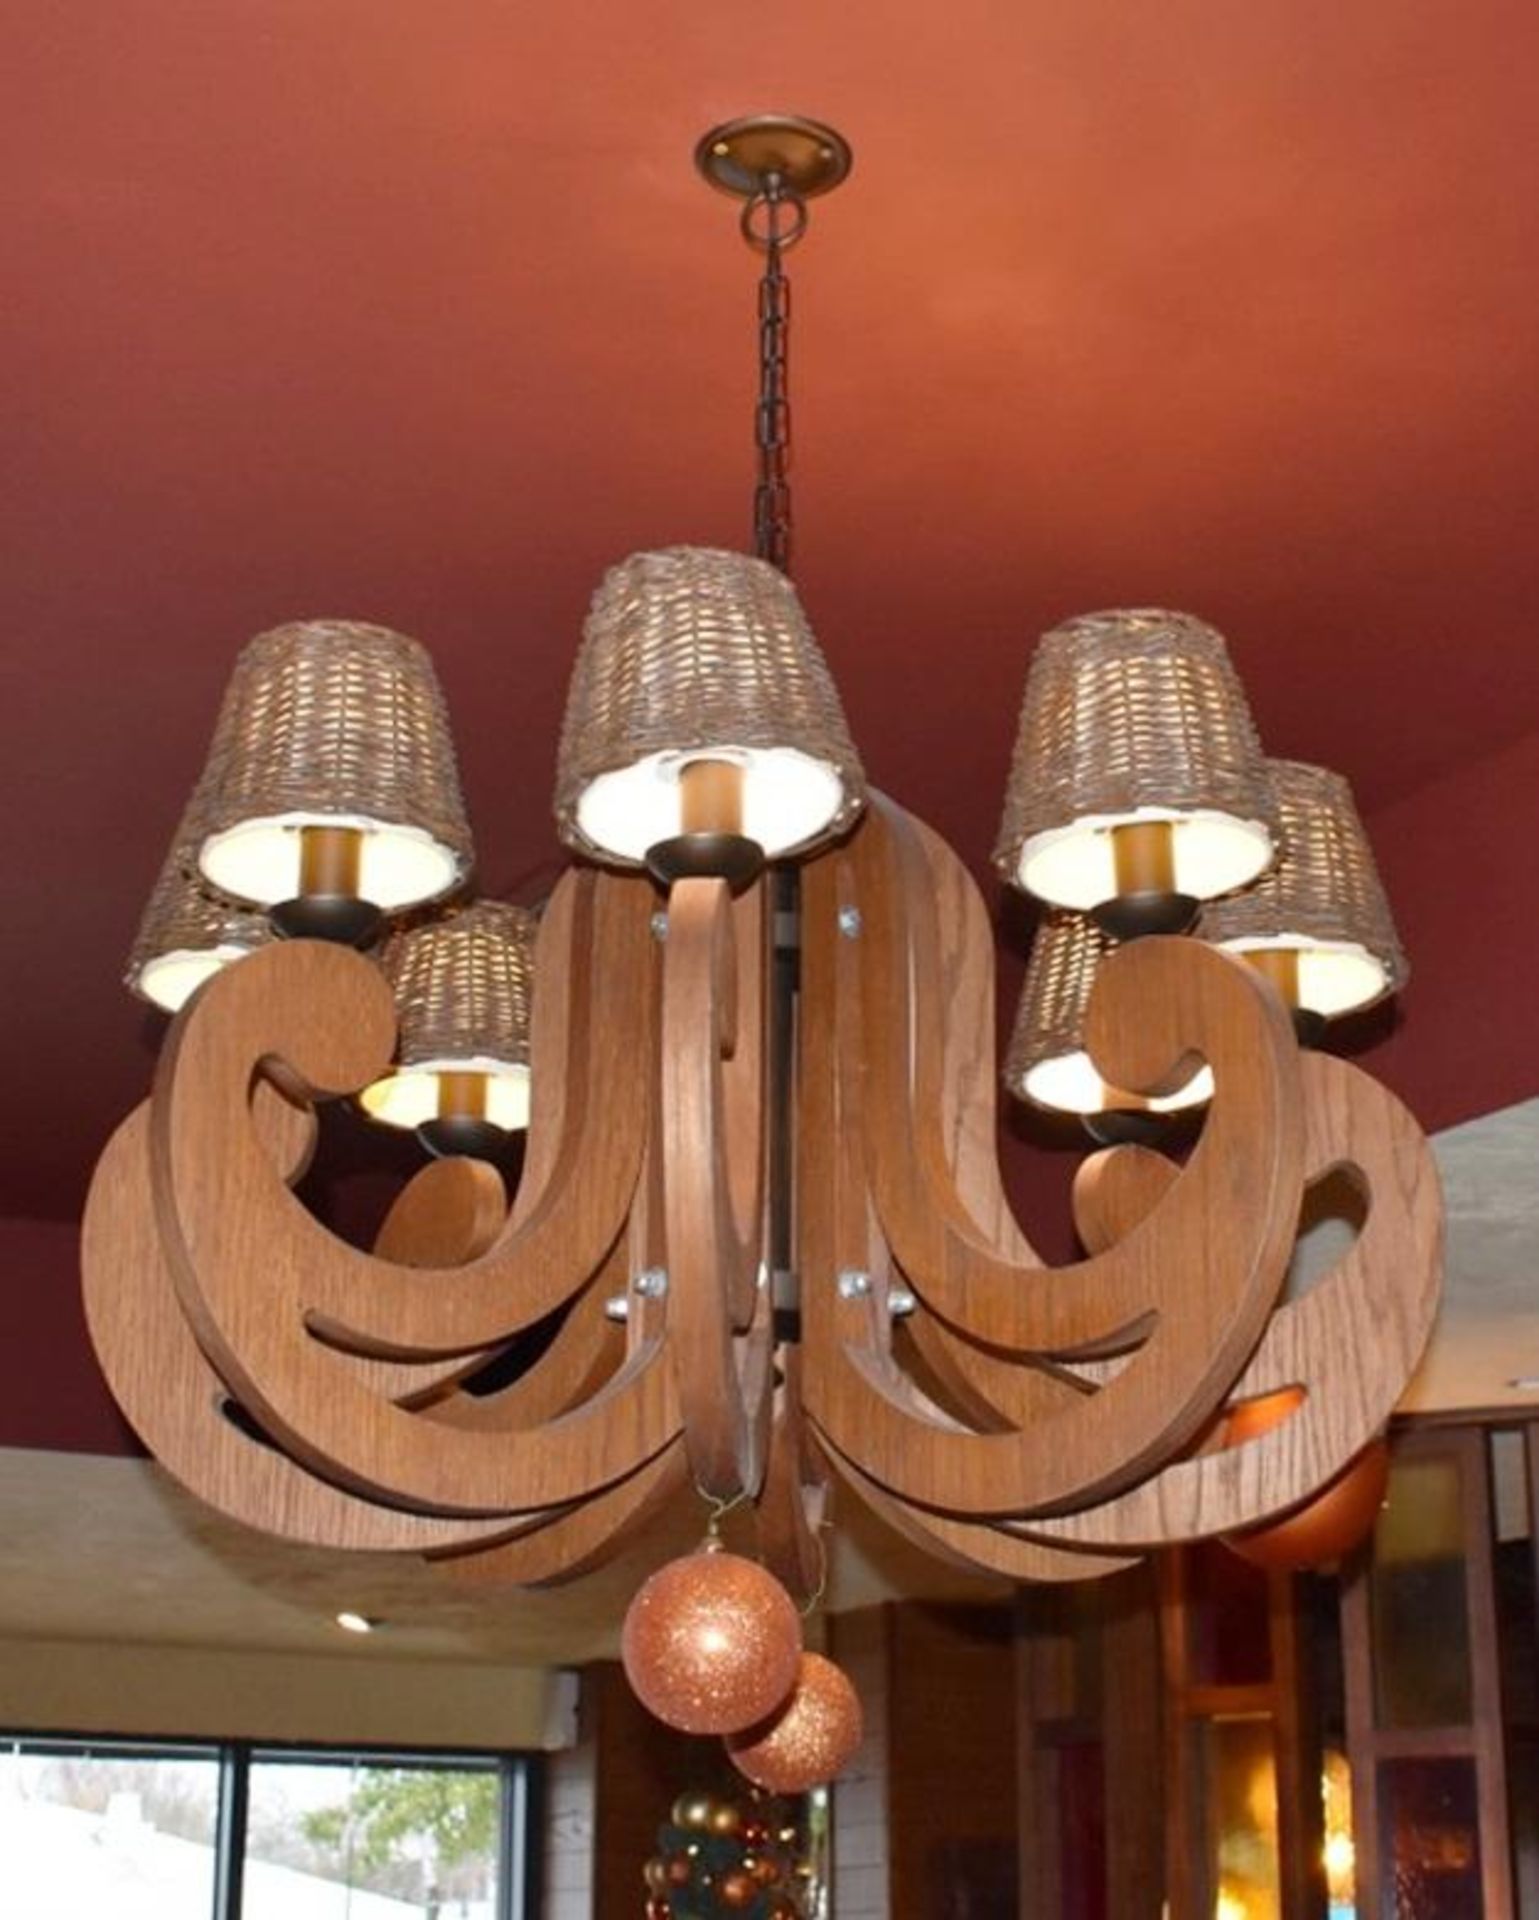 1 x Large Artisan Wooden Candelabra 8 Light Chandelier With Rustic Basket Shades - Dimensions: Diame